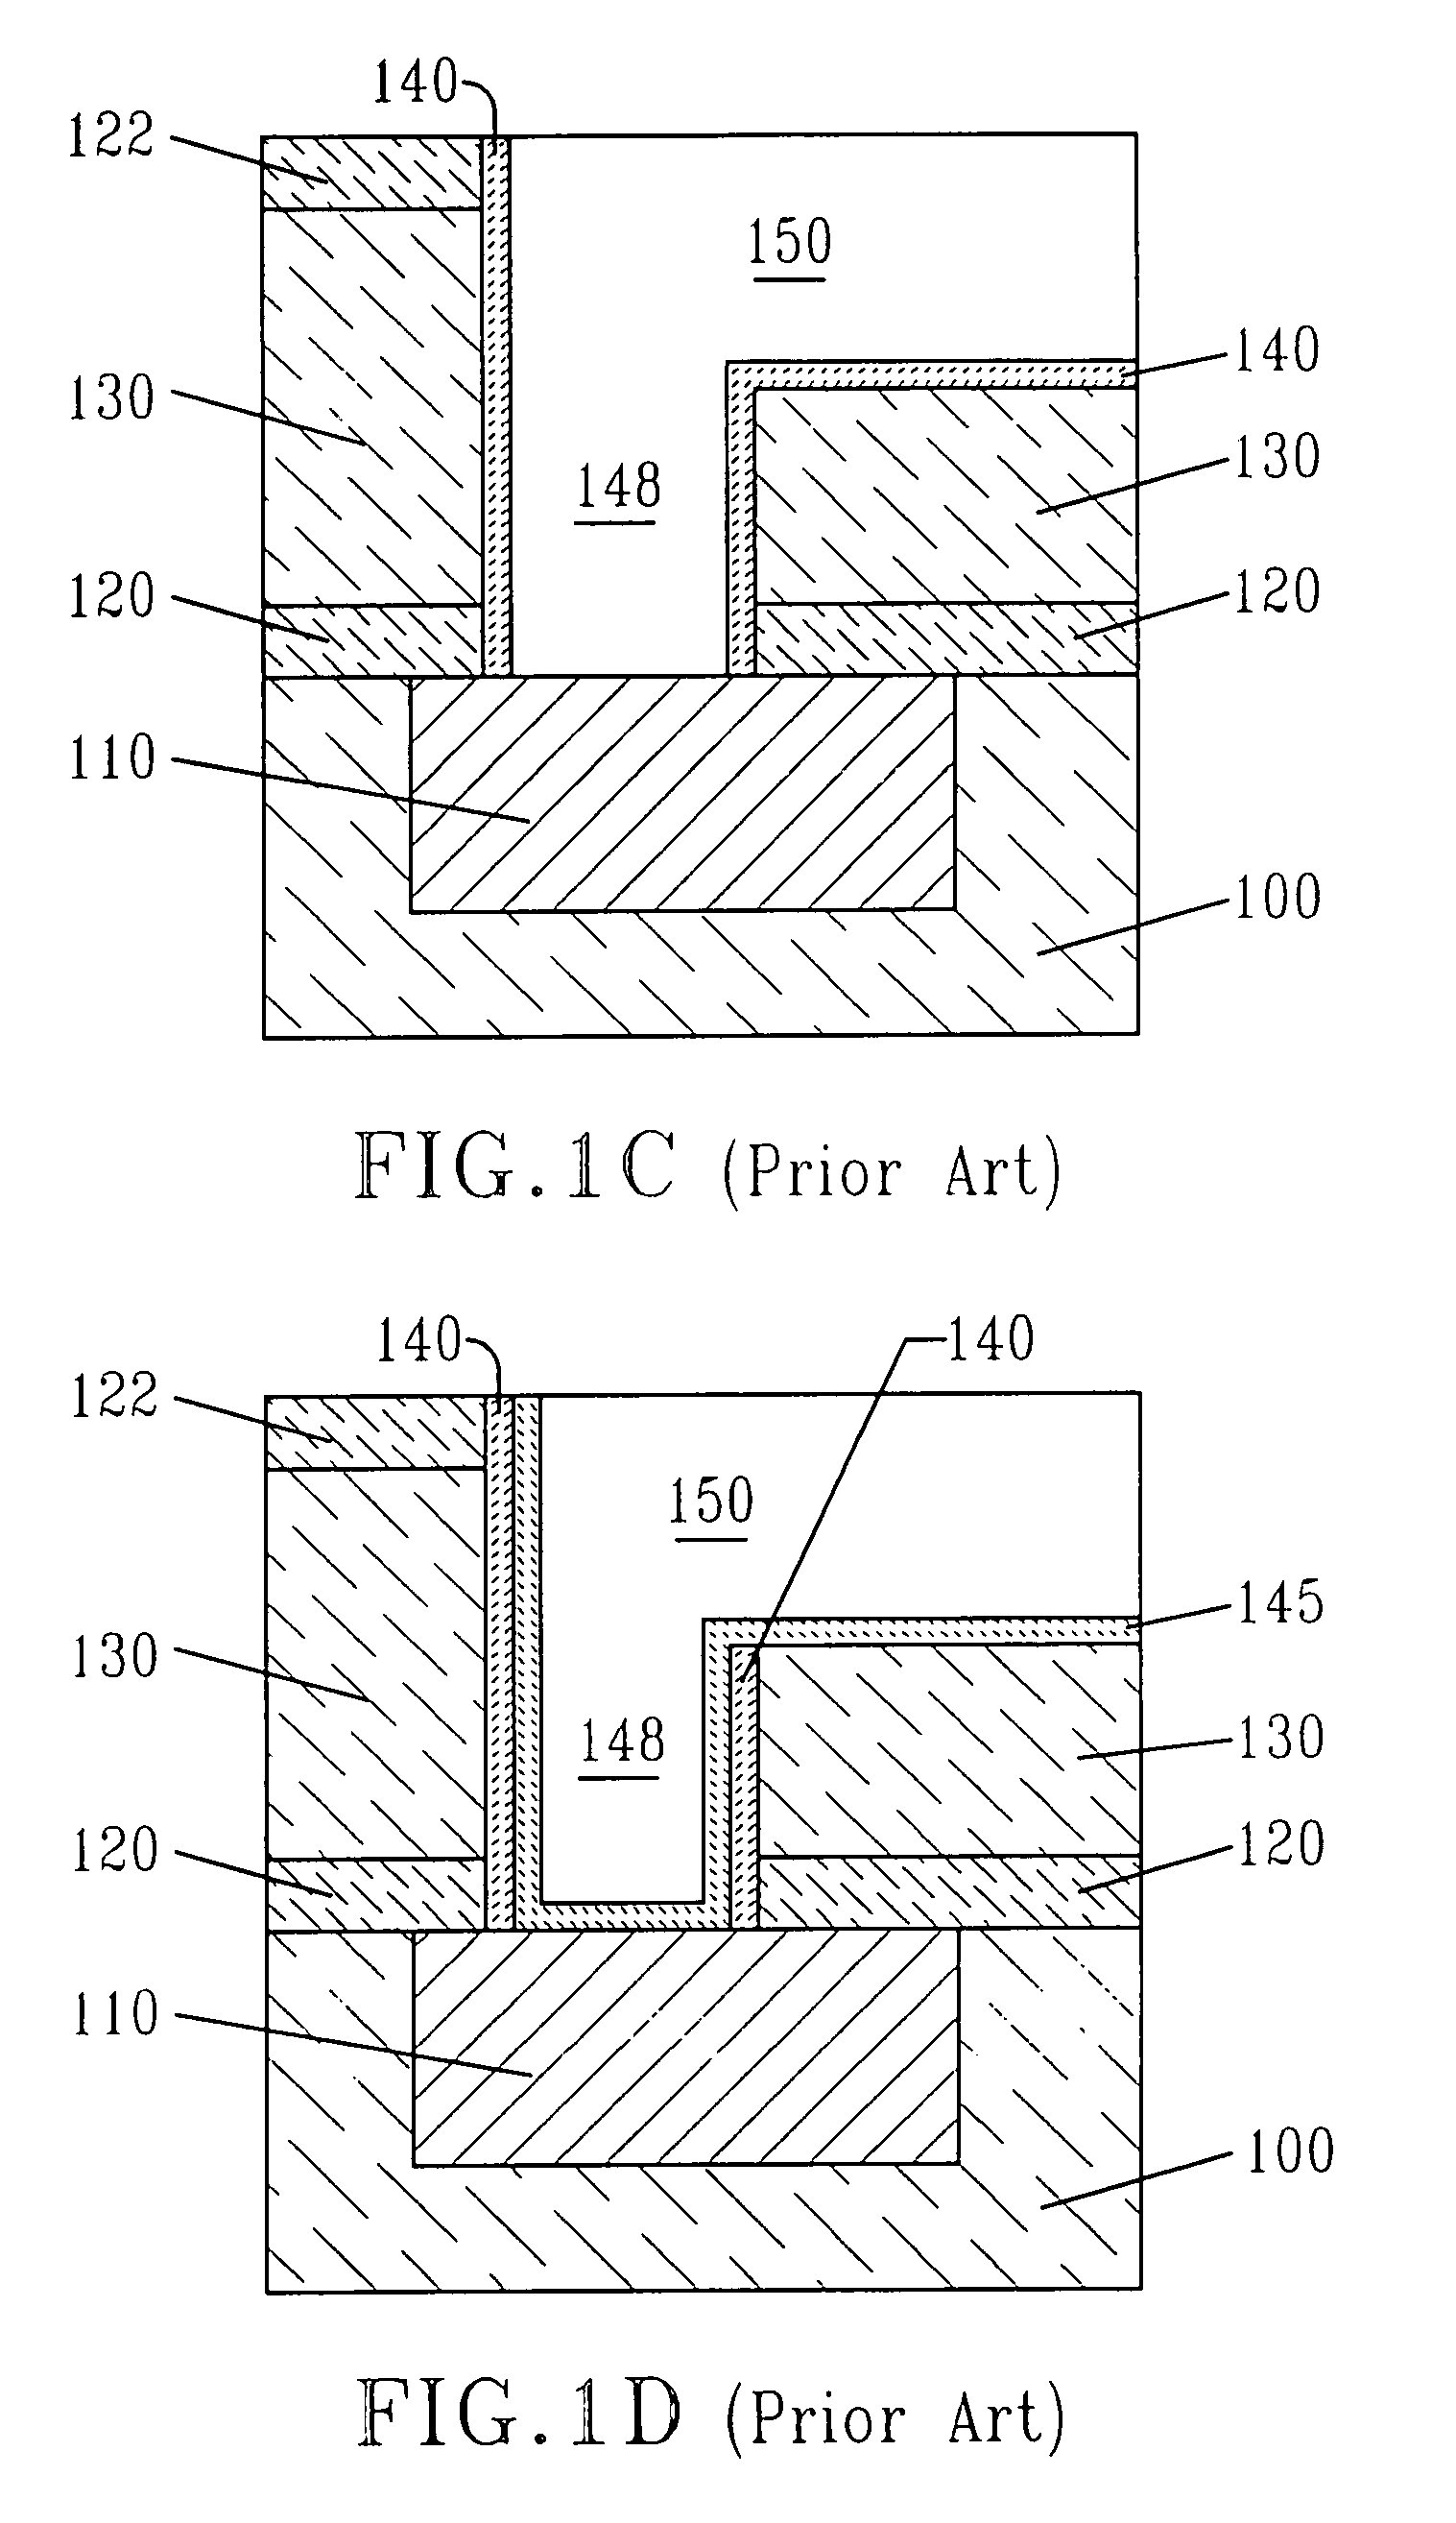 Modified via bottom structure for reliability enhancement